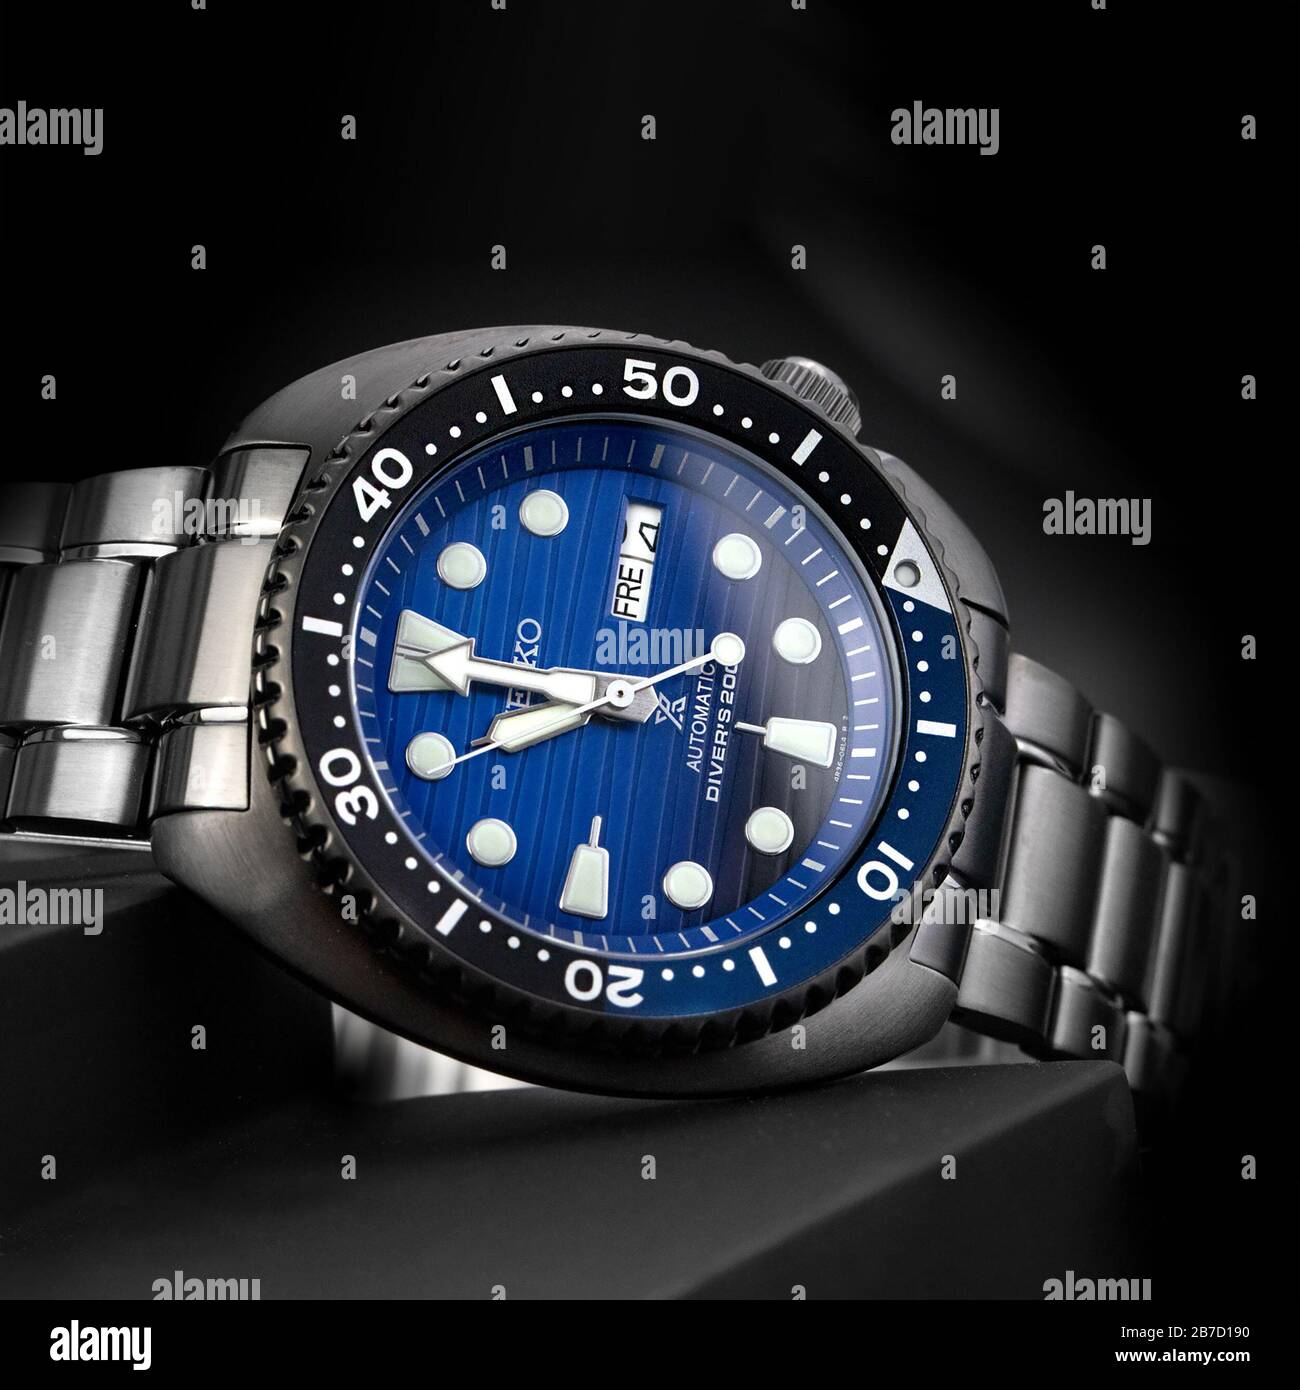 Stainless Steel Seiko Watch for diving with black background and blue dial  Stock Photo - Alamy